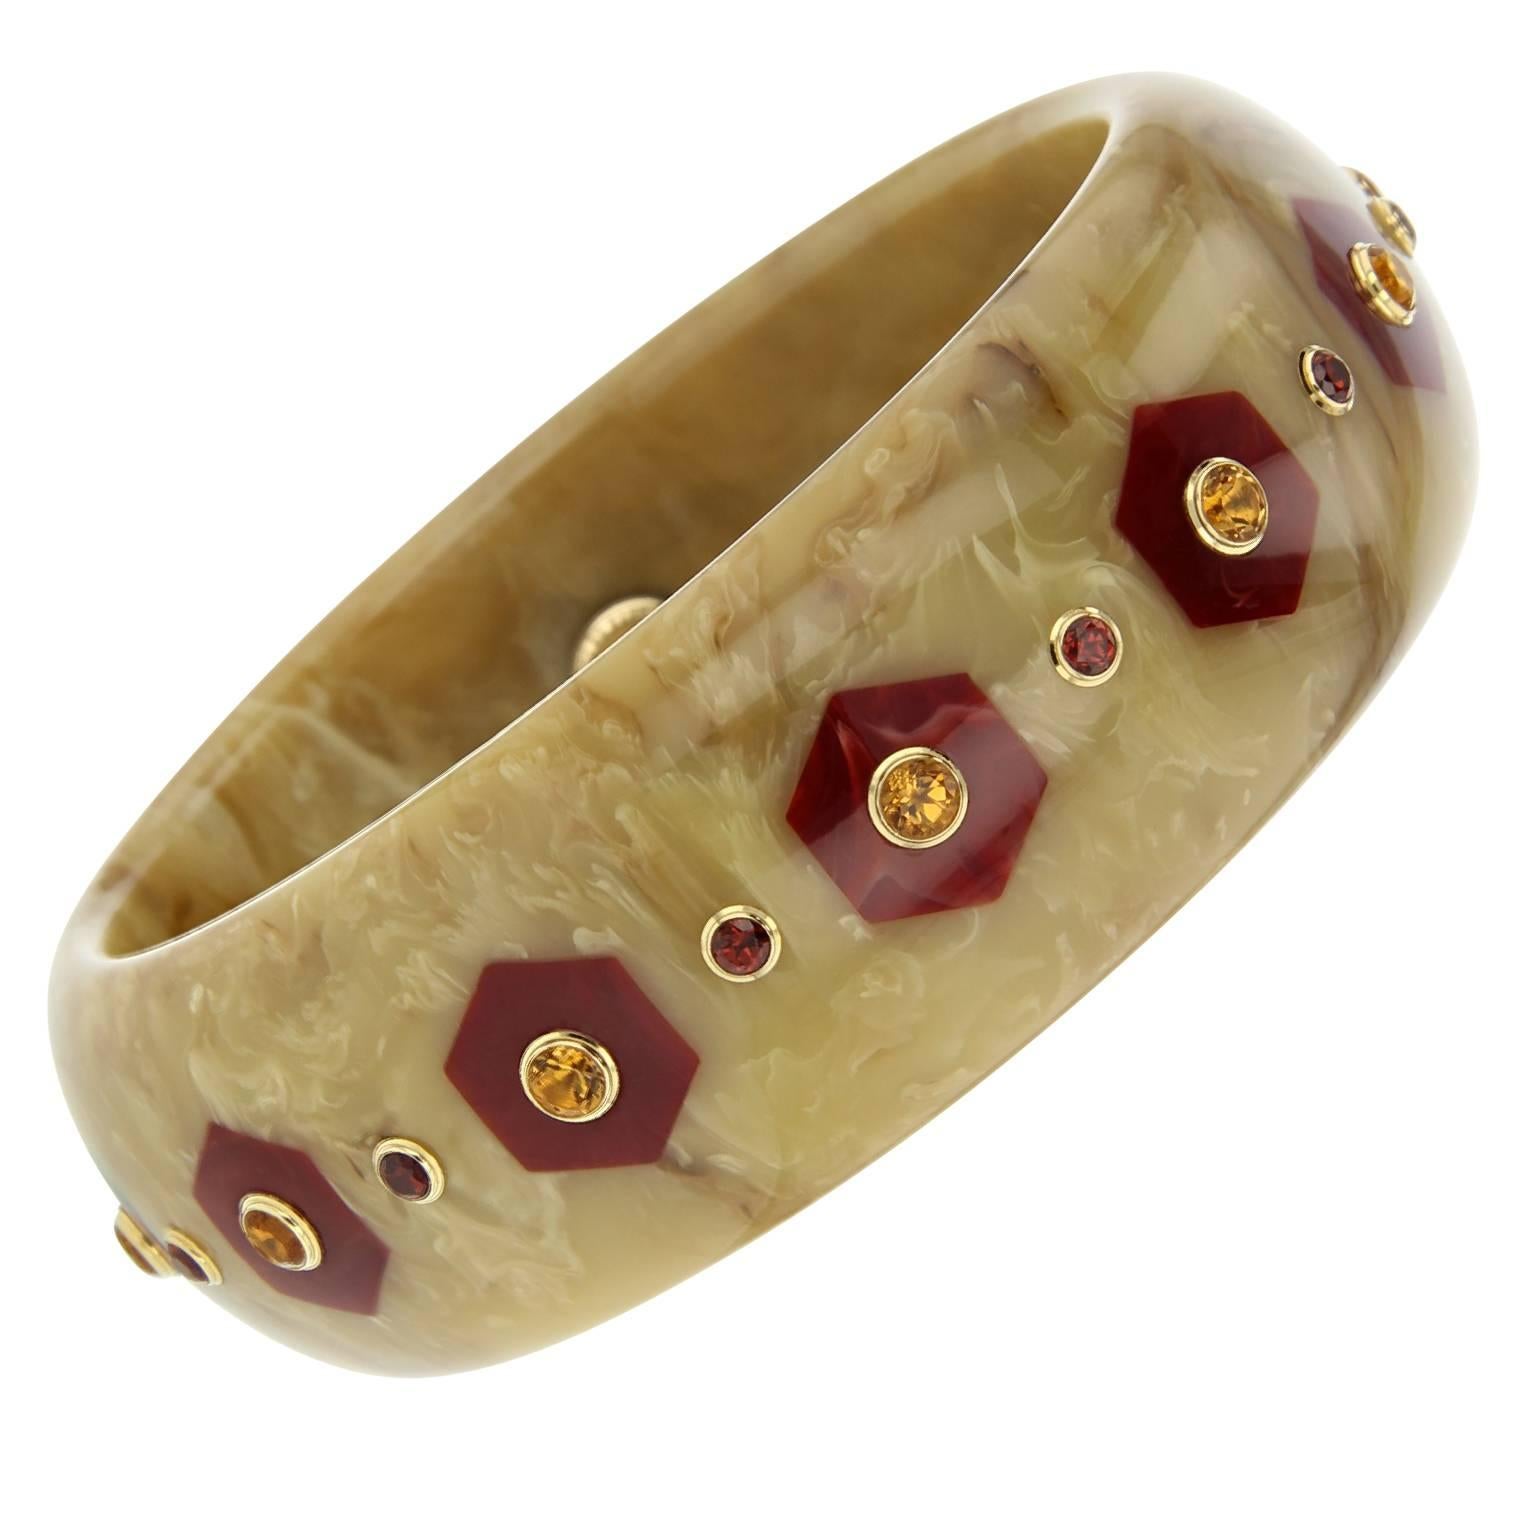 This Mark Davis bangle was handcrafted using marbled beige vintage bakelite and meticulously inlayed with hexagonal shaped pieces of burgundy bakelite. Each hexagon is centered with a citrine and in between is a rich mozambique garnet, bezel-set in